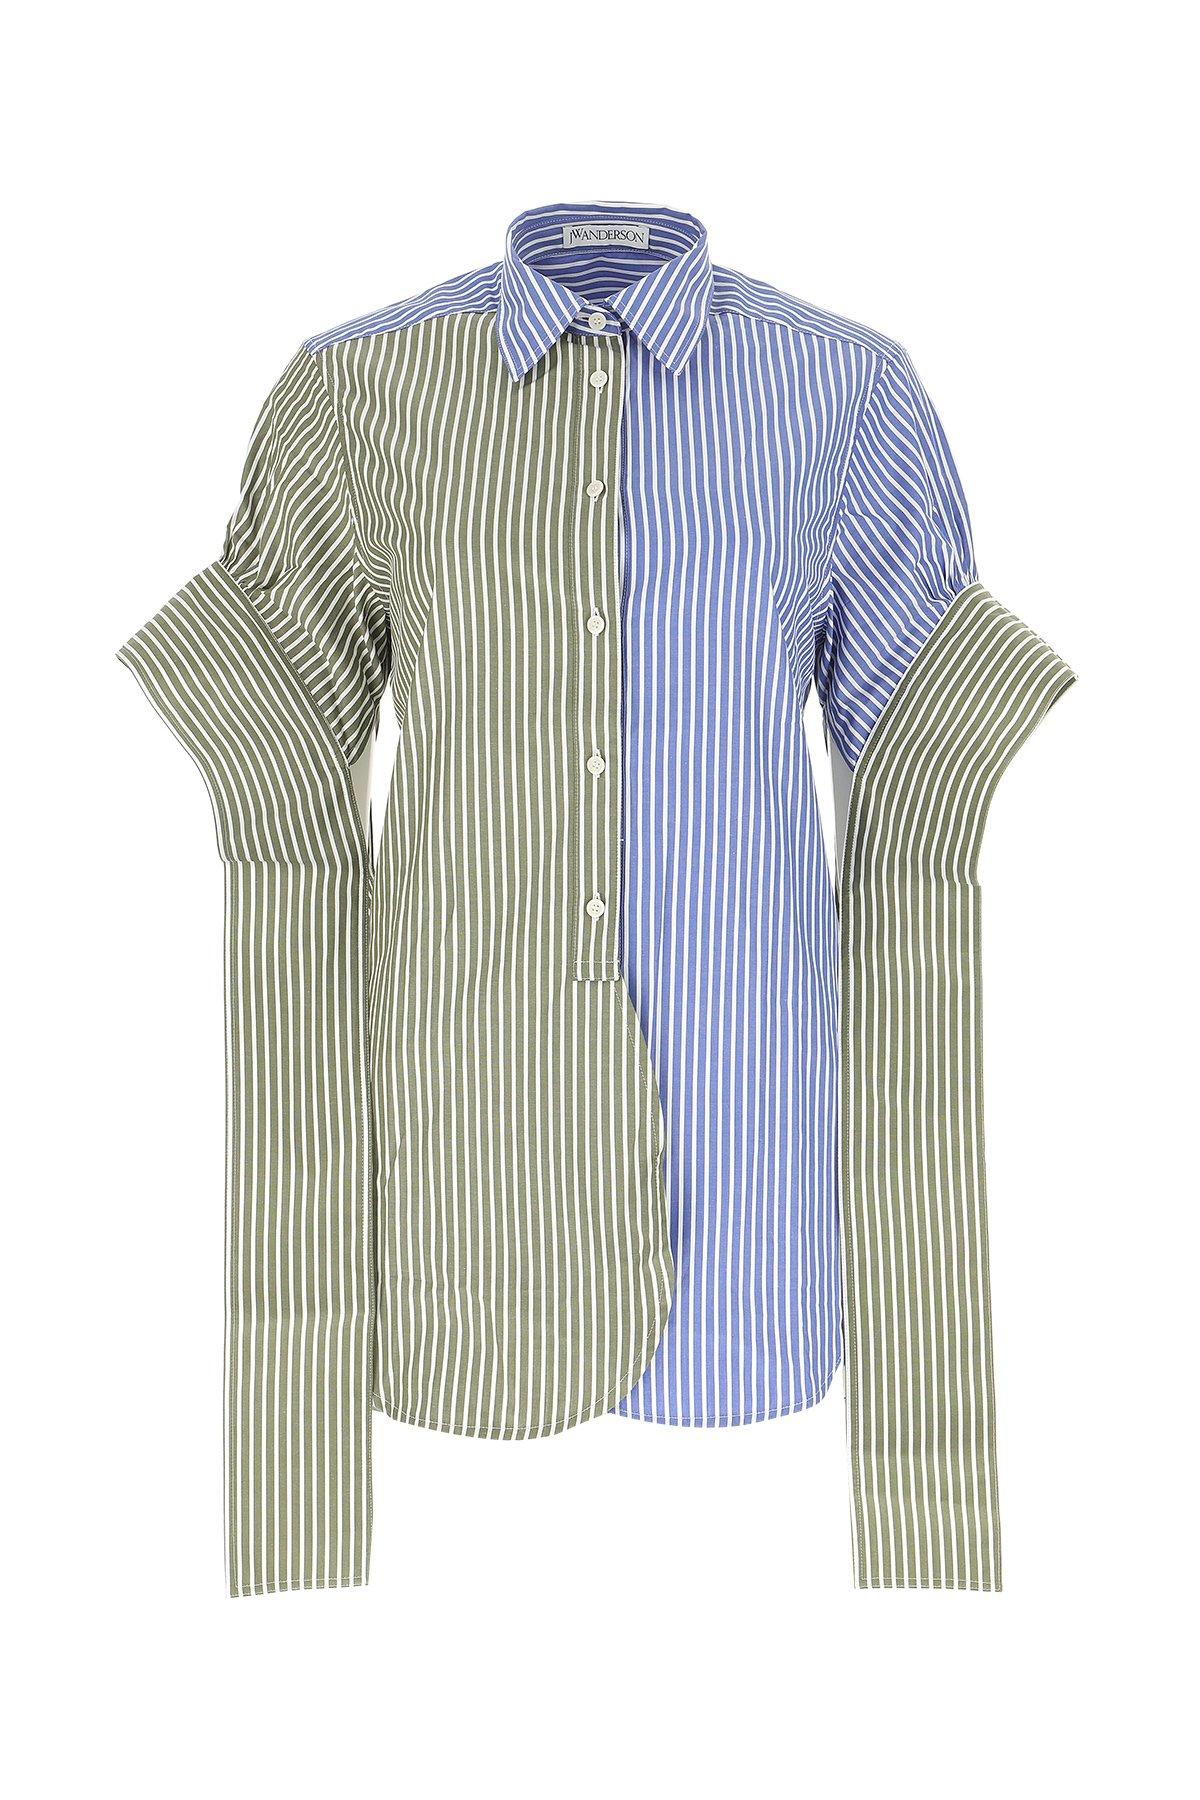 JW Anderson Cotton Striped Tab Shirt in Blue - Lyst